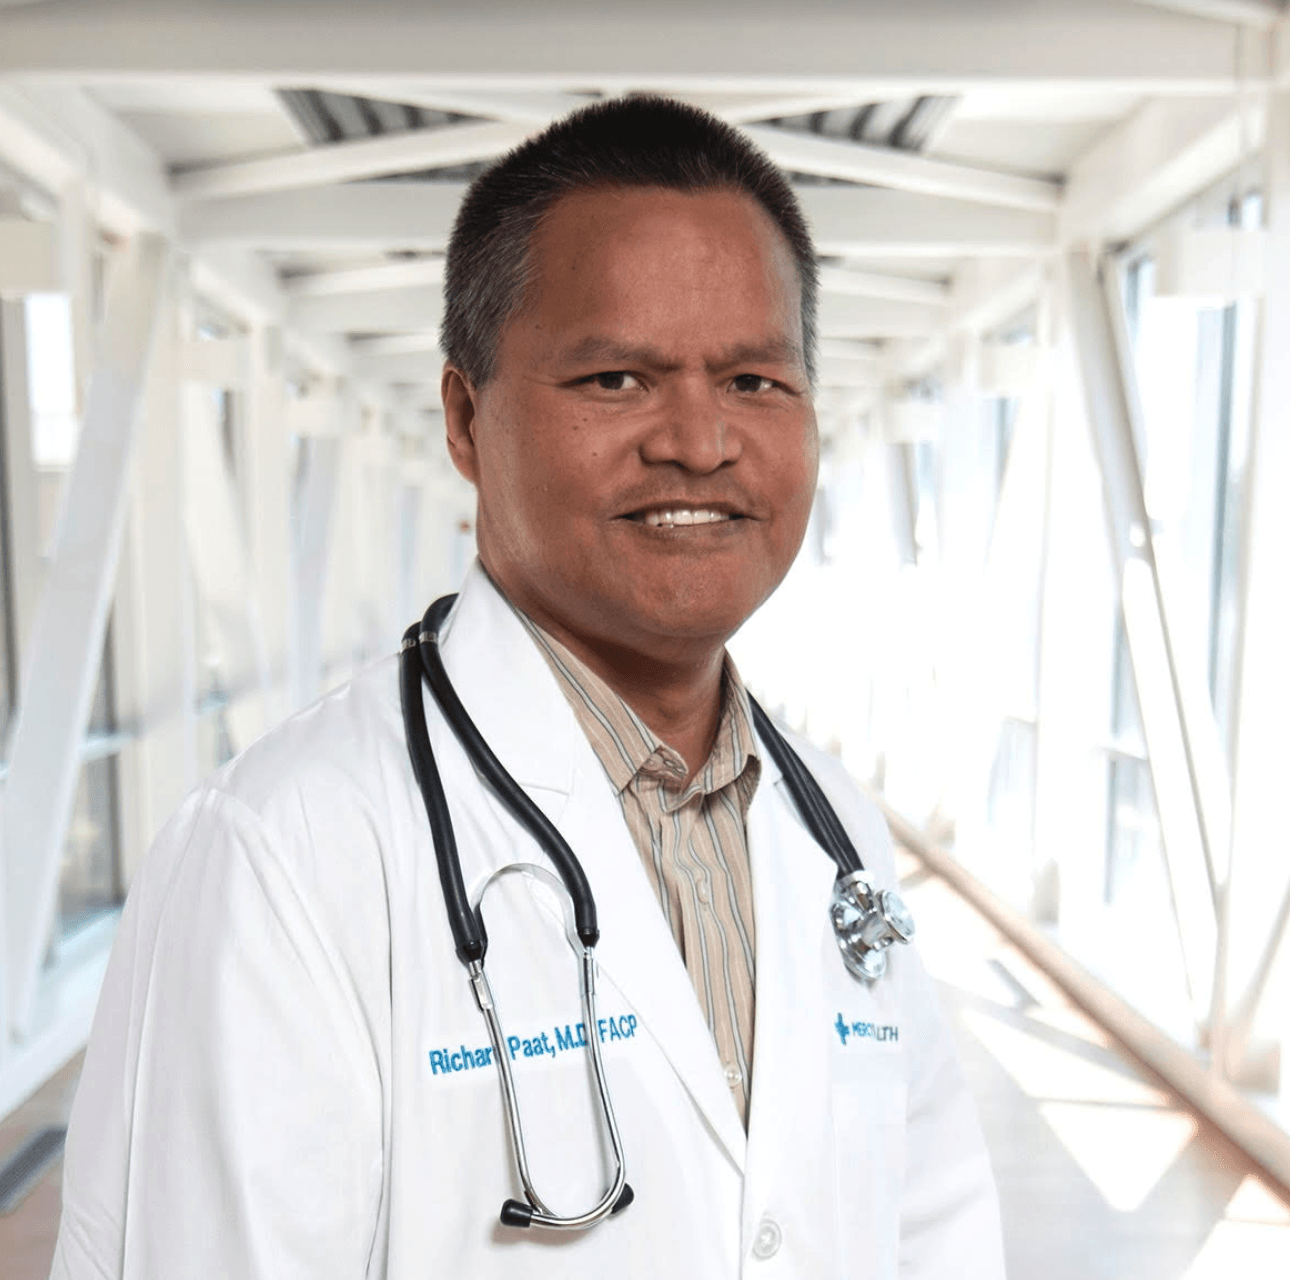 Richard Paat, MD Wins the 2023 Free Clinic Physician of the Year Award